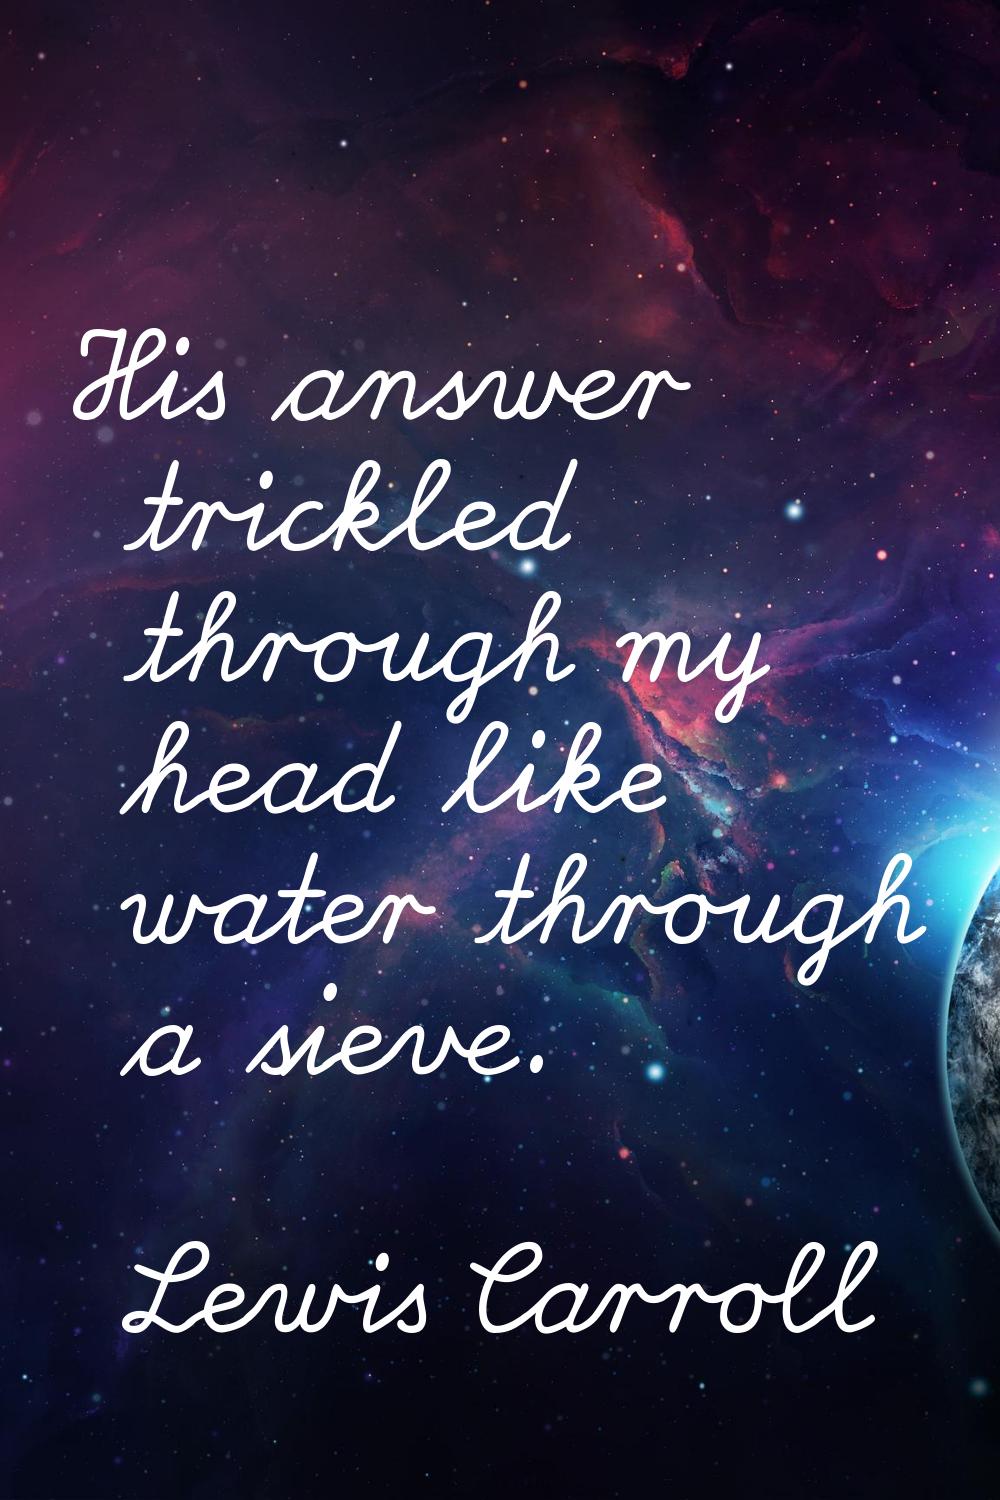 His answer trickled through my head like water through a sieve.